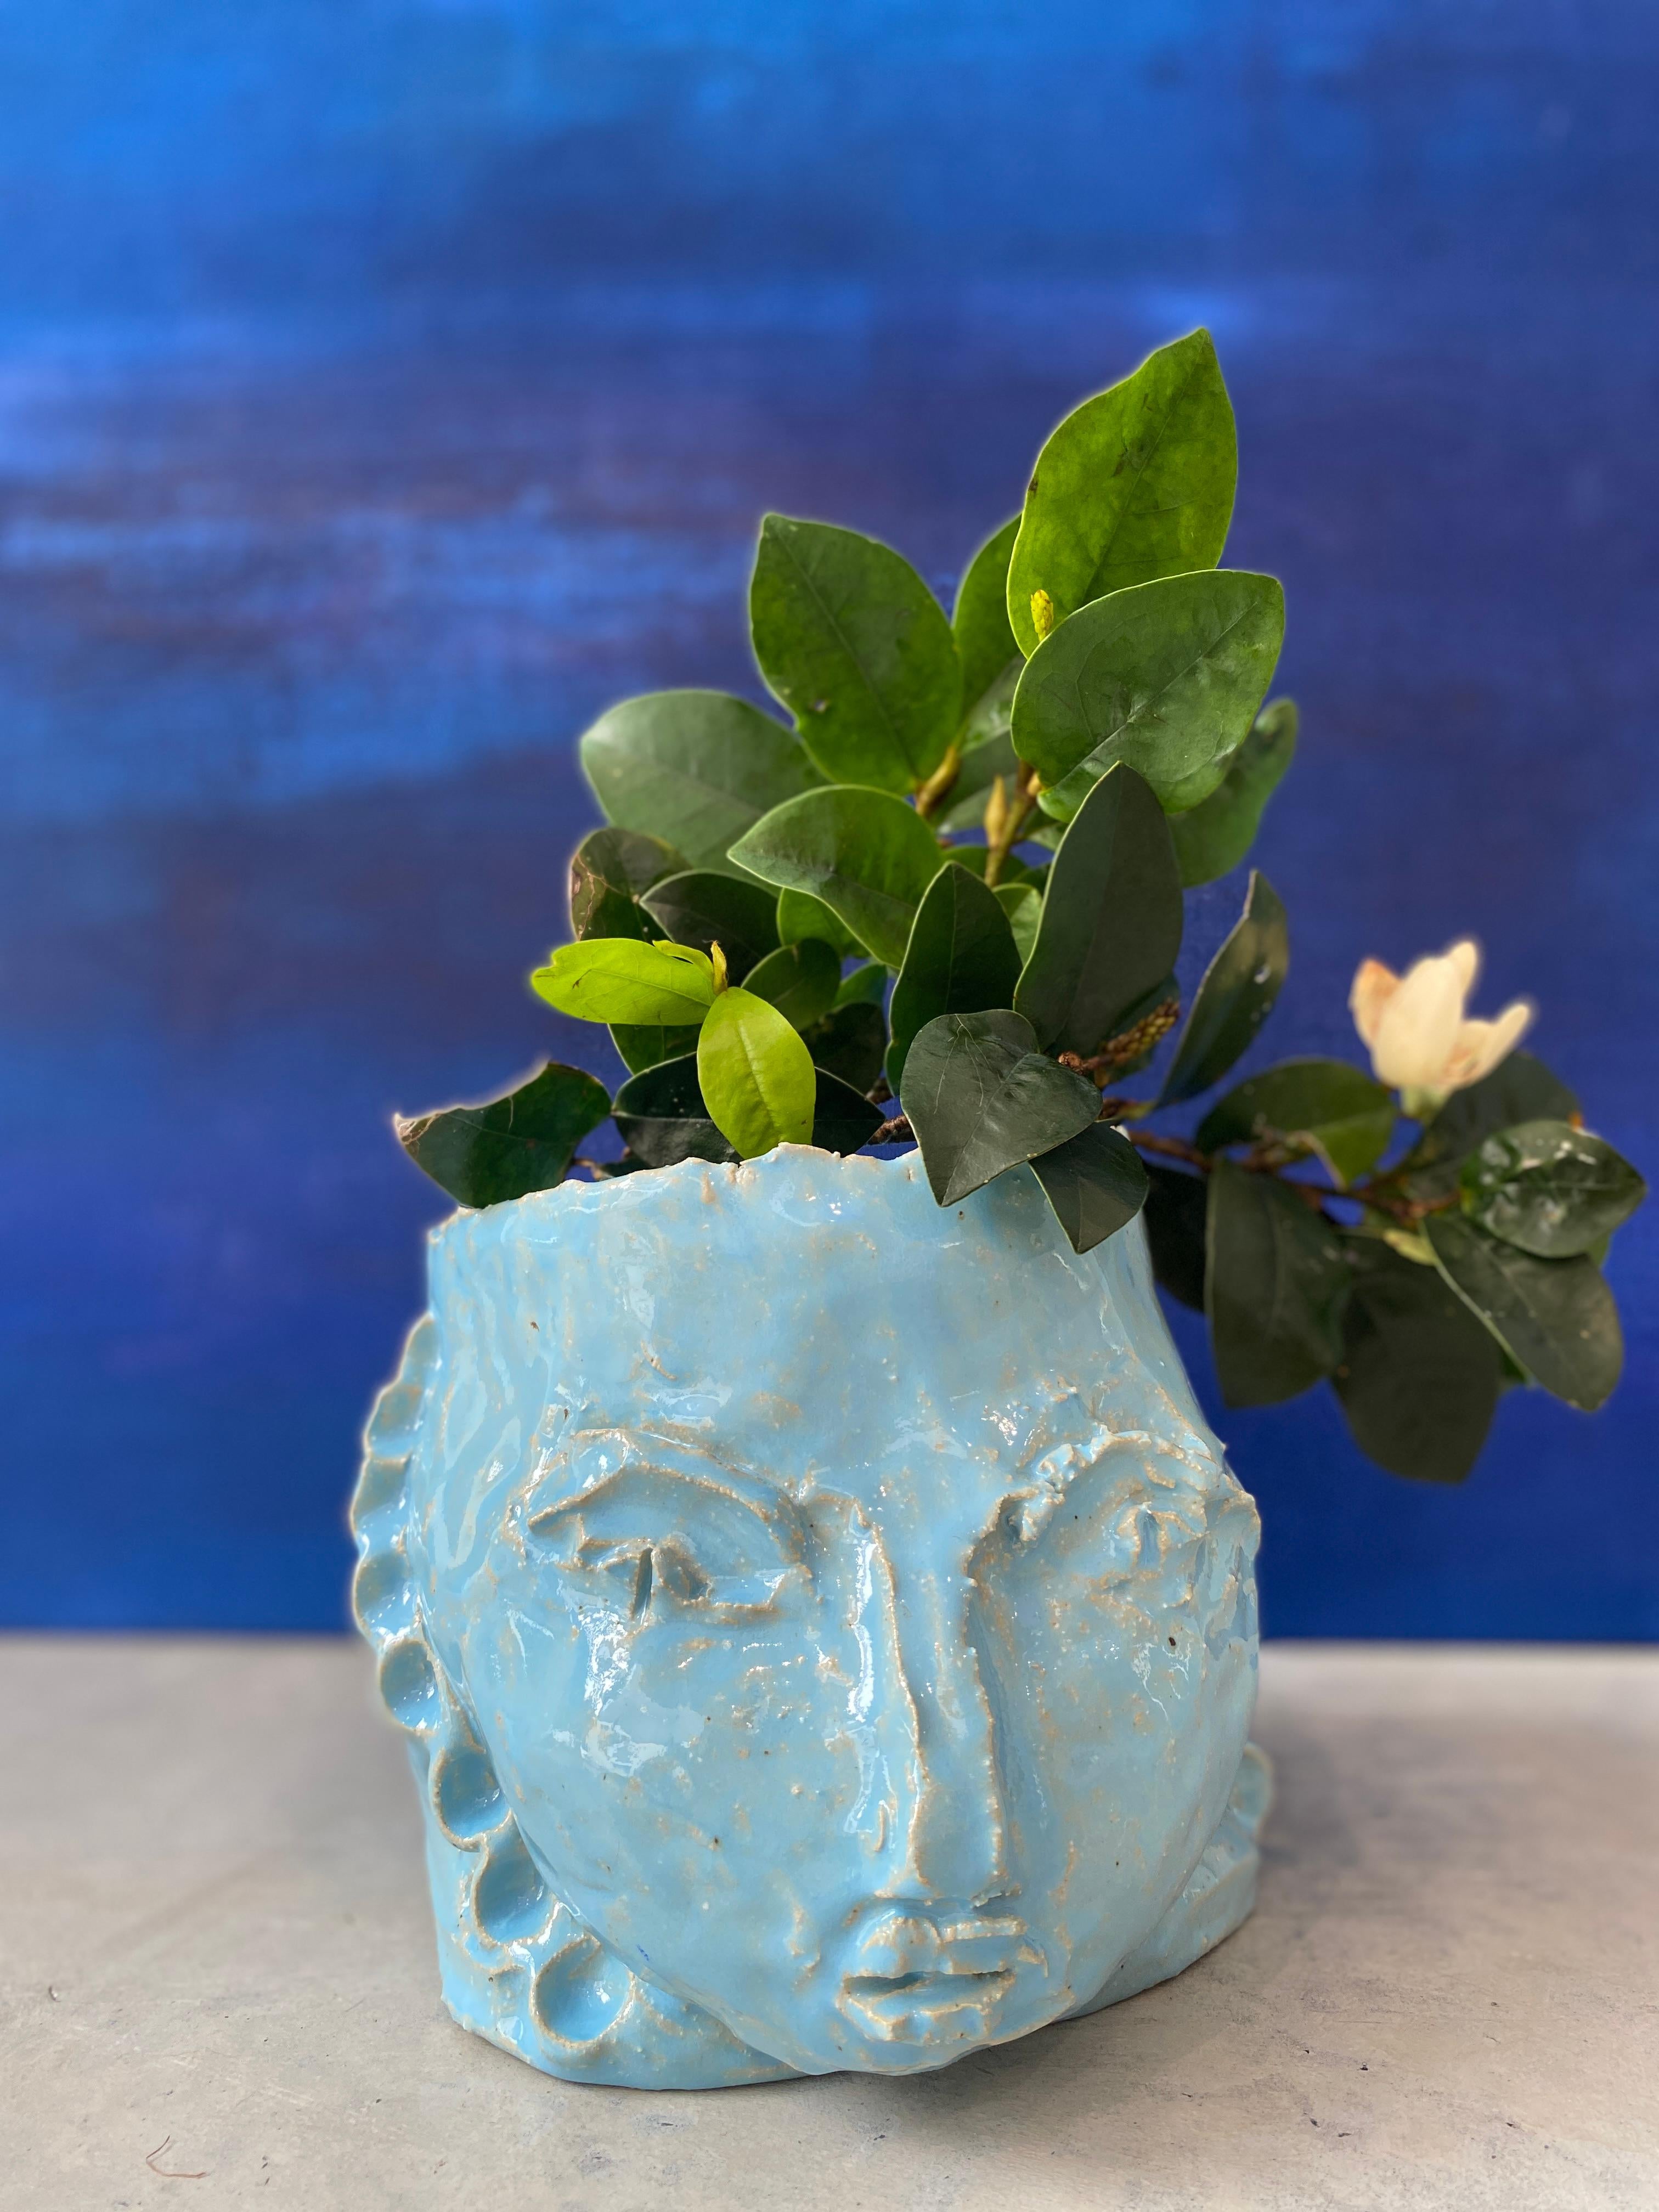 Light Blue rustic wabi sabi hand sculpted glazed clay head face vessel vase - Contemporary Sculpture by Kathleen Rhee